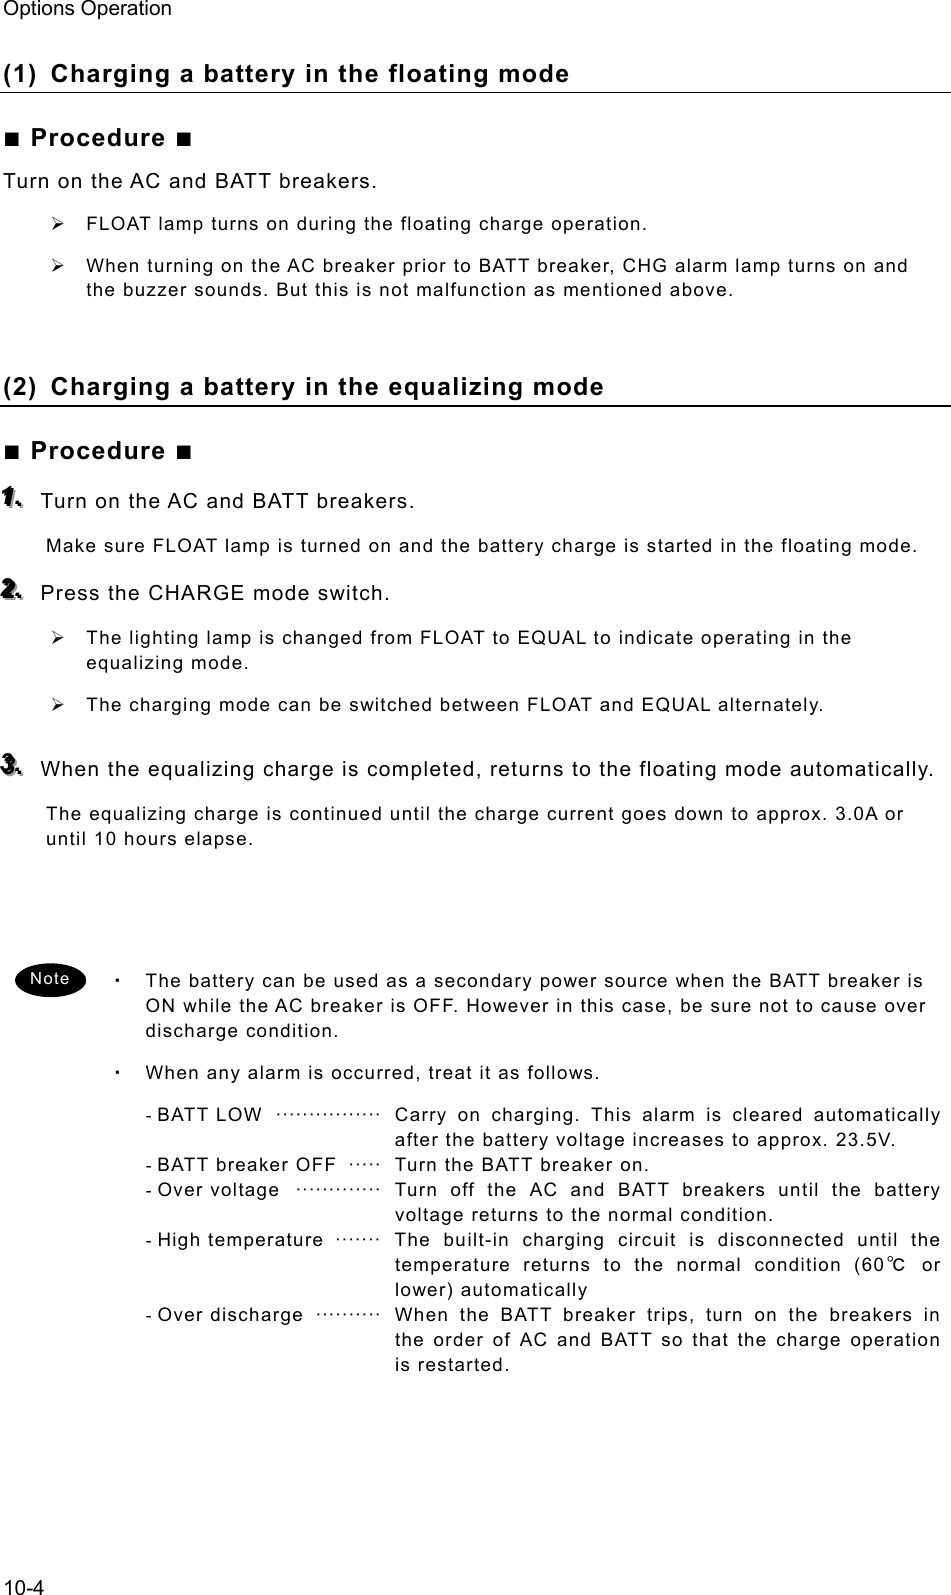 Options Operation 10-4 (1)  Charging a battery in the floating mode ■ Procedure ■ Turn on the AC and BATT breakers. ¾  FLOAT lamp turns on during the floating charge operation. ¾  When turning on the AC breaker prior to BATT breaker, CHG alarm lamp turns on and the buzzer sounds. But this is not malfunction as mentioned above.  (2)  Charging a battery in the equalizing mode ■ Procedure ■ 111...   Turn on the AC and BATT breakers. Make sure FLOAT lamp is turned on and the battery charge is started in the floating mode. 222...   Press the CHARGE mode switch. ¾  The lighting lamp is changed from FLOAT to EQUAL to indicate operating in the equalizing mode. ¾  The charging mode can be switched between FLOAT and EQUAL alternately. 333...   When the equalizing charge is completed, returns to the floating mode automatically.   The equalizing charge is continued until the charge current goes down to approx. 3.0A or until 10 hours elapse.    ・ The battery can be used as a secondary power source when the BATT breaker is ON while the AC breaker is OFF. However in this case, be sure not to cause over discharge condition. ・ When any alarm is occurred, treat it as follows. - BATT LOW  ················  Carry on charging. This alarm is cleared automatically after the battery voltage increases to approx. 23.5V. - BATT breaker OFF   ·····   Turn the BATT breaker on. - Over voltage  ·············  Turn off the AC and BATT breakers until the battery voltage returns to the normal condition. - High  temperature  ·······   The  built-in charging circuit is disconnected until the temperature returns to the normal condition (60℃ or lower) automatically - Over discharge  ··········  When the BATT breaker trips, turn on the breakers in the order of AC and BATT so that the charge operation is restarted.  Note 